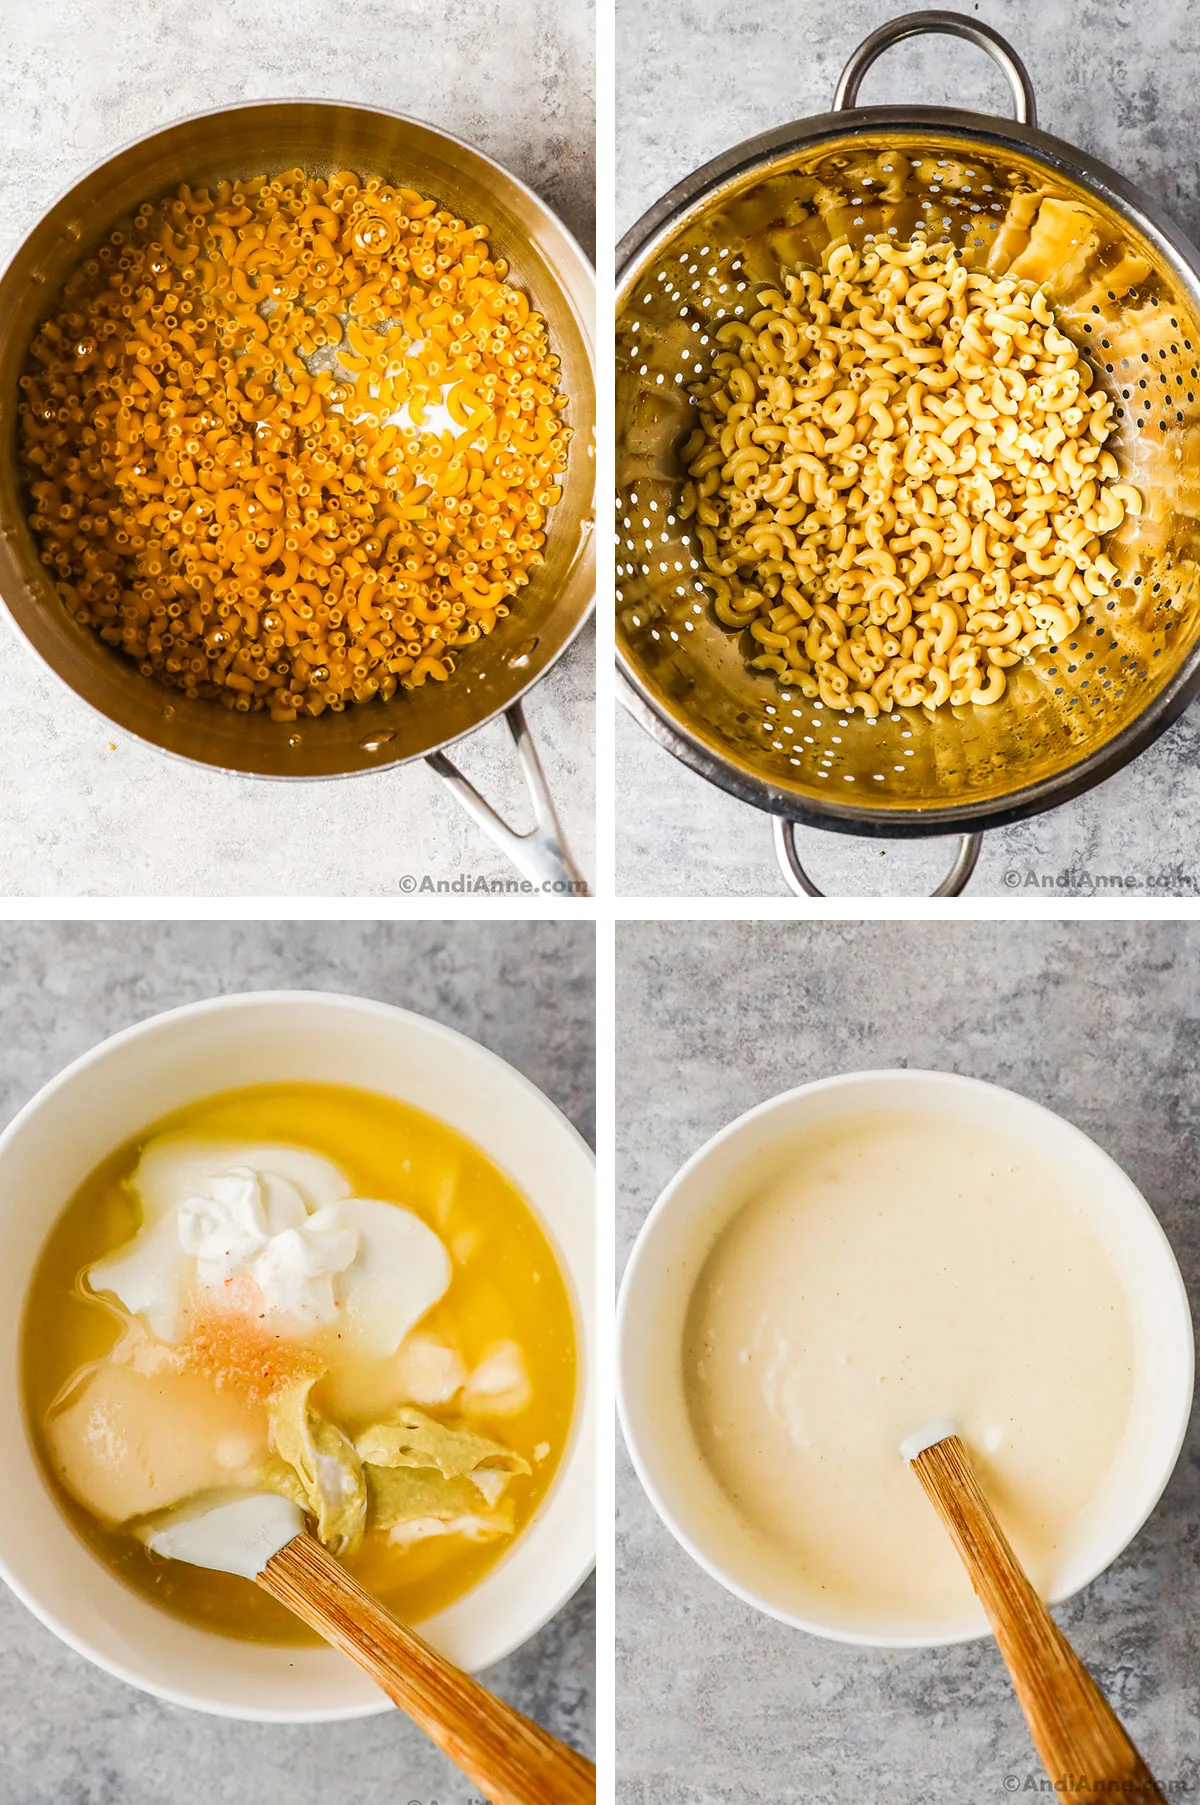 Four images, first is macaroni pasta and water in pot, second is cooked pasta in strainer, third is various ingredients dumped in a bowl, fourth is creamy sauce in a bowl.